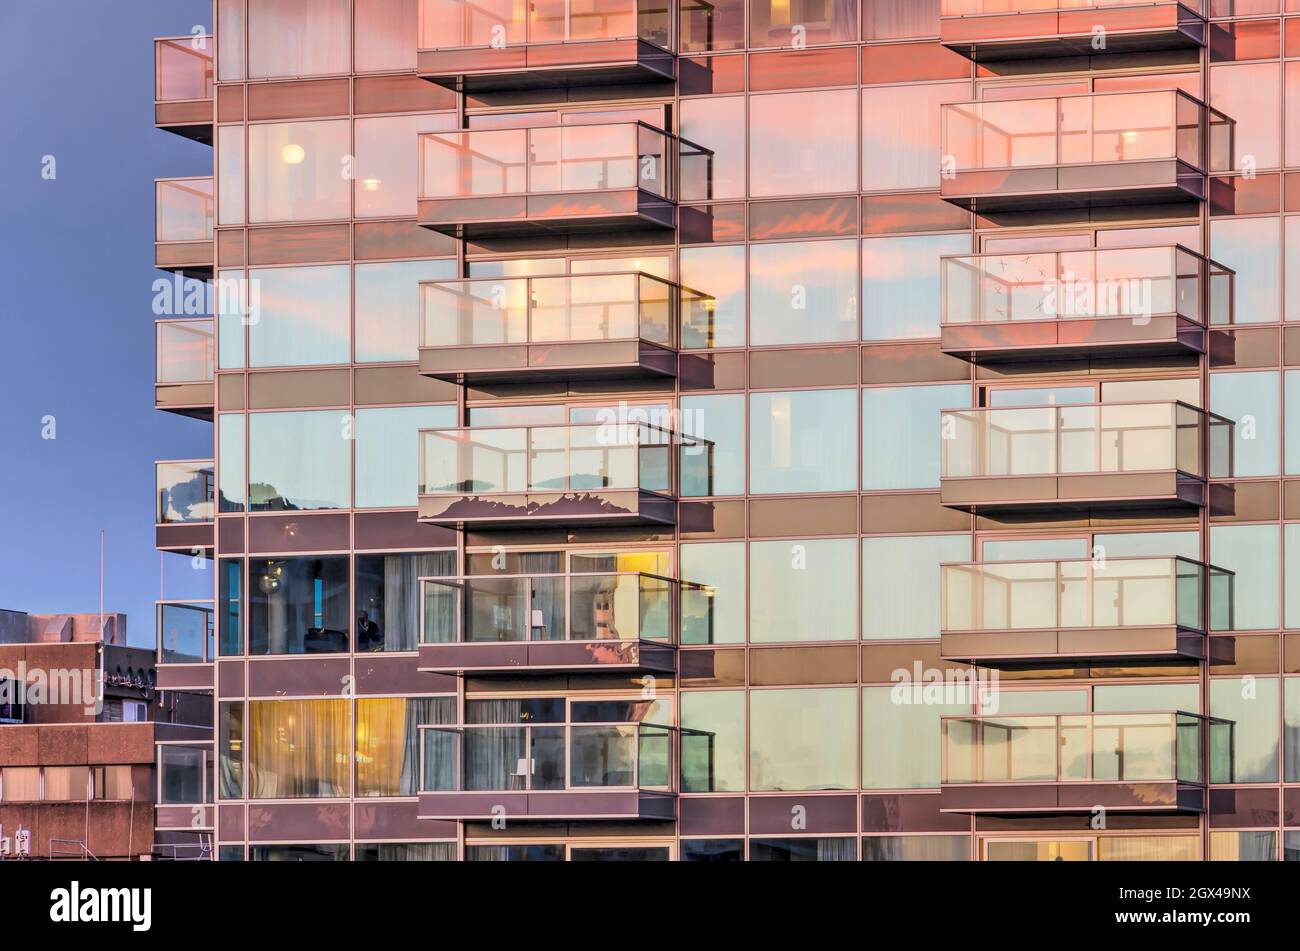 Rotterdam, The Netherlands, October 3, 2021: spectacular sky at sunset reflecting in the glass facade of a residential building in the Lijnbaan area Stock Photo